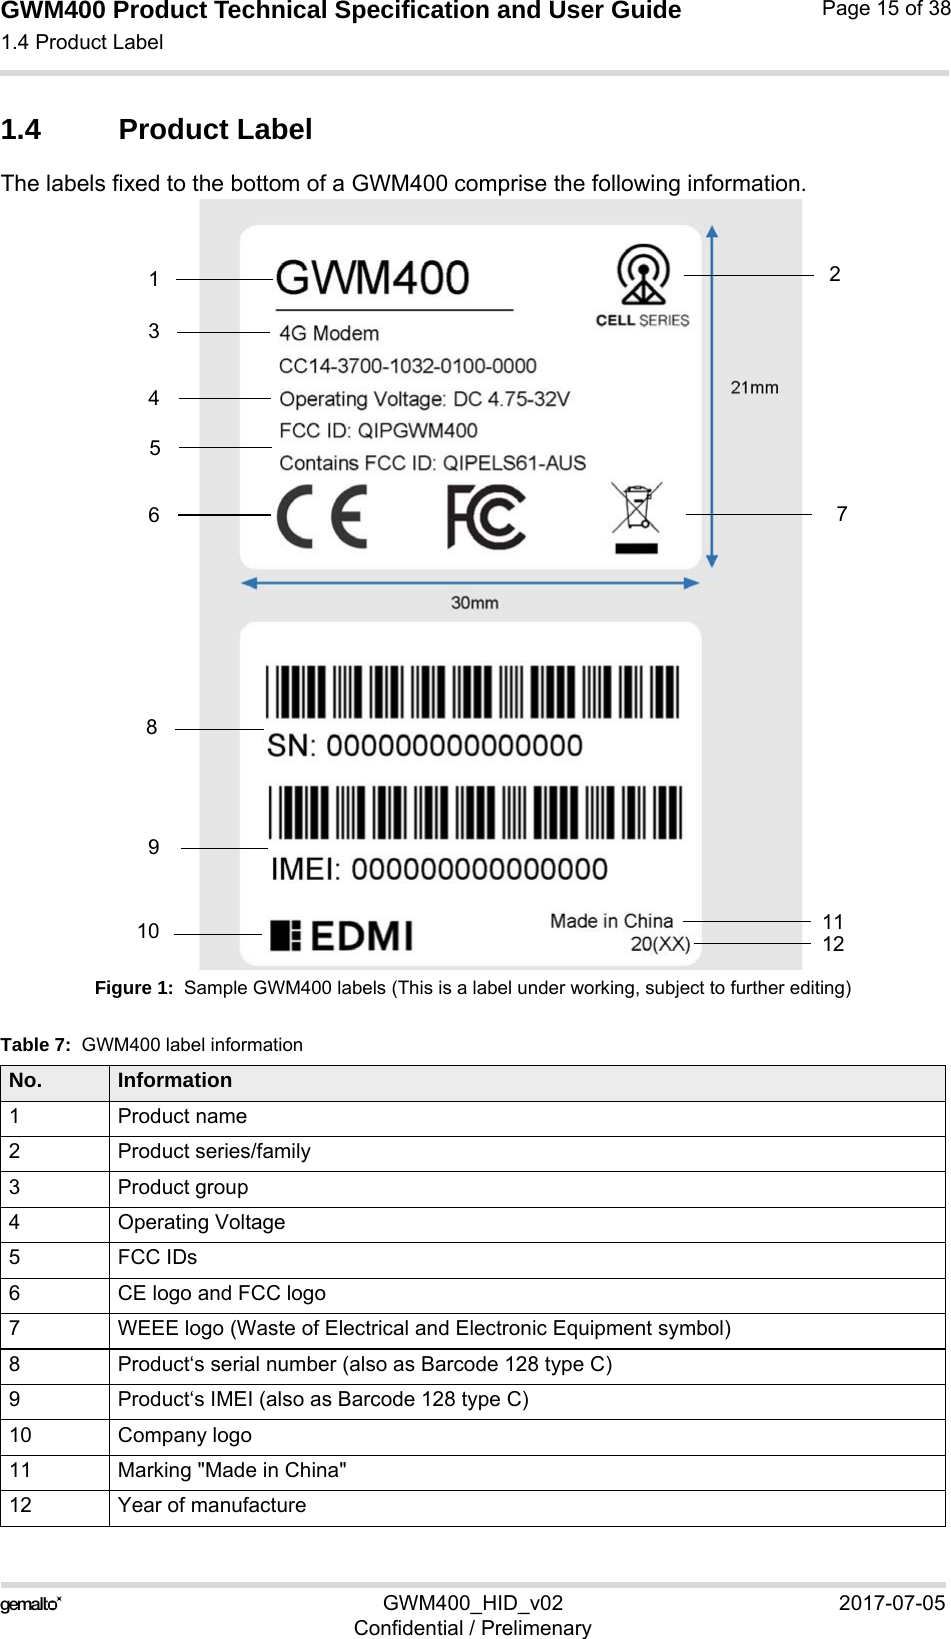 GWM400 Product Technical Specification and User Guide1.4 Product Label15GWM400_HID_v02 2017-07-05Confidential / PrelimenaryPage 15 of 381.4 Product LabelThe labels fixed to the bottom of a GWM400 comprise the following information.Figure 1:  Sample GWM400 labels (This is a label under working, subject to further editing)Table 7:  GWM400 label informationNo. Information1 Product name2 Product series/family3 Product group4 Operating Voltage5 FCC IDs6 CE logo and FCC logo7 WEEE logo (Waste of Electrical and Electronic Equipment symbol)8 Product‘s serial number (also as Barcode 128 type C)9 Product‘s IMEI (also as Barcode 128 type C)10 Company logo11 Marking &quot;Made in China&quot;12 Year of manufacture1346278910 11125